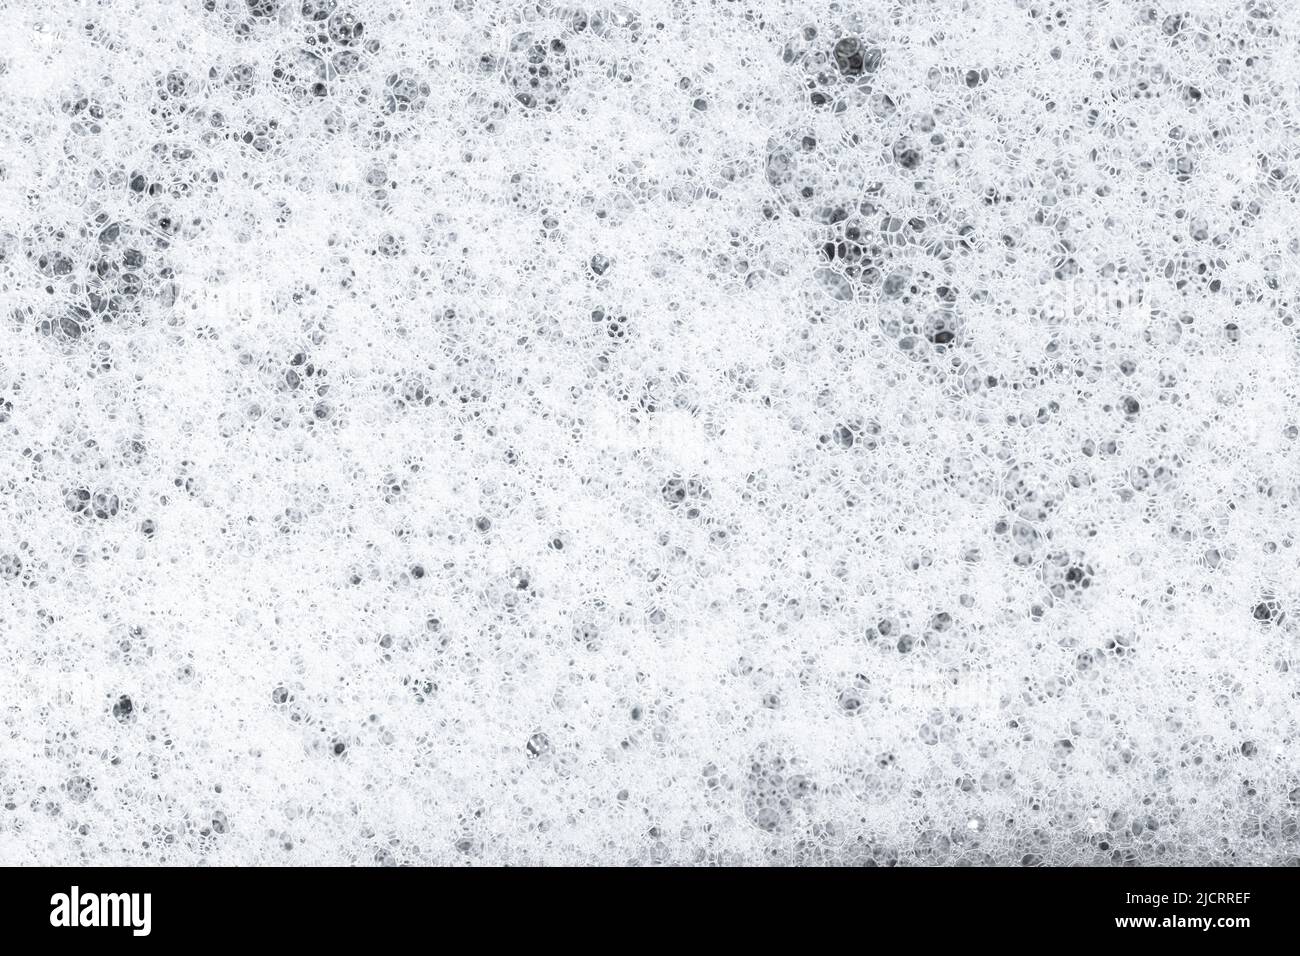 White Soap foam with bubbles background texture. Full frame Stock Photo